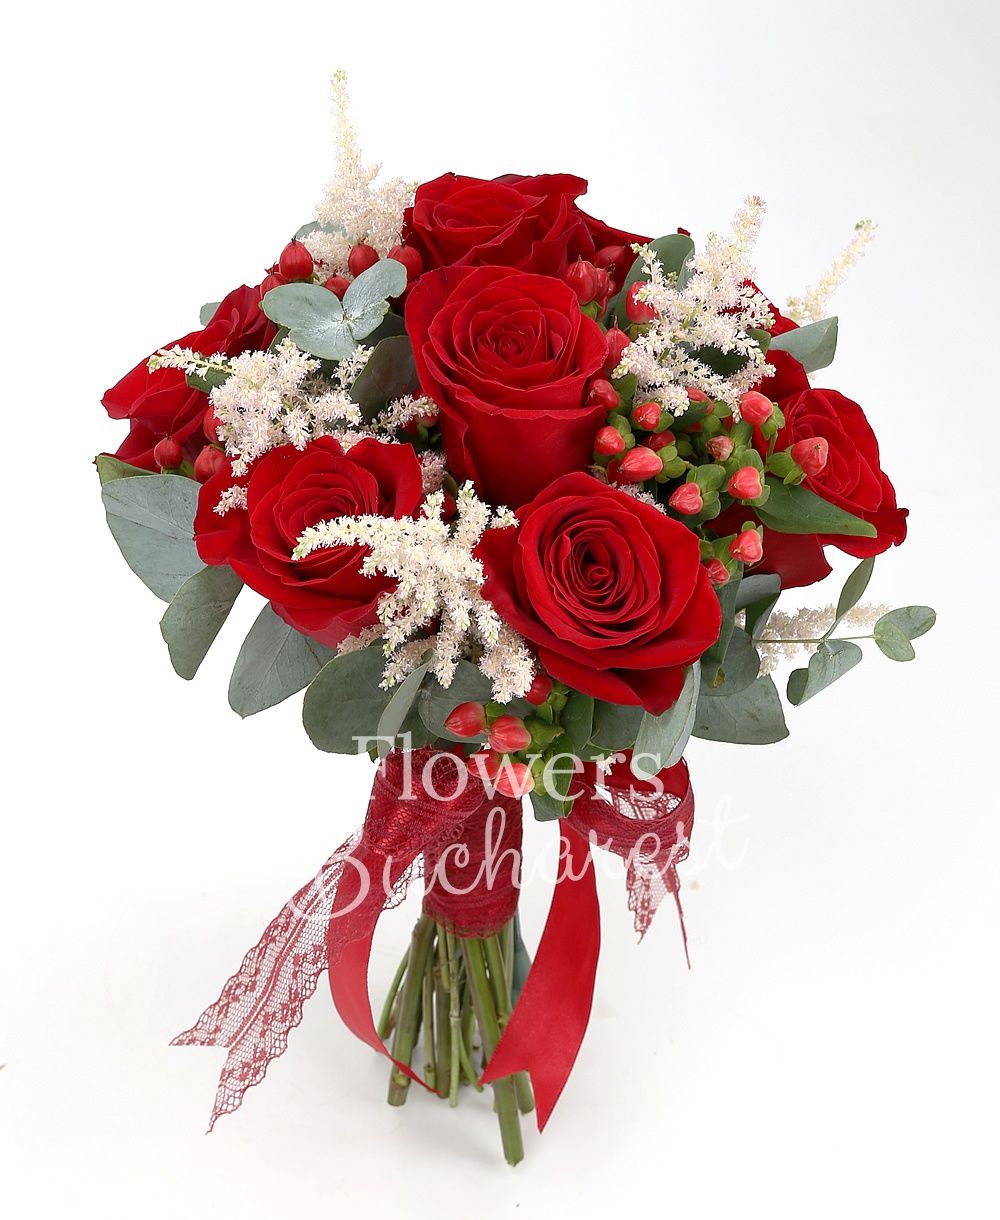 9 red roses, 5 pink astilbe, 5 red hypericum, greenery